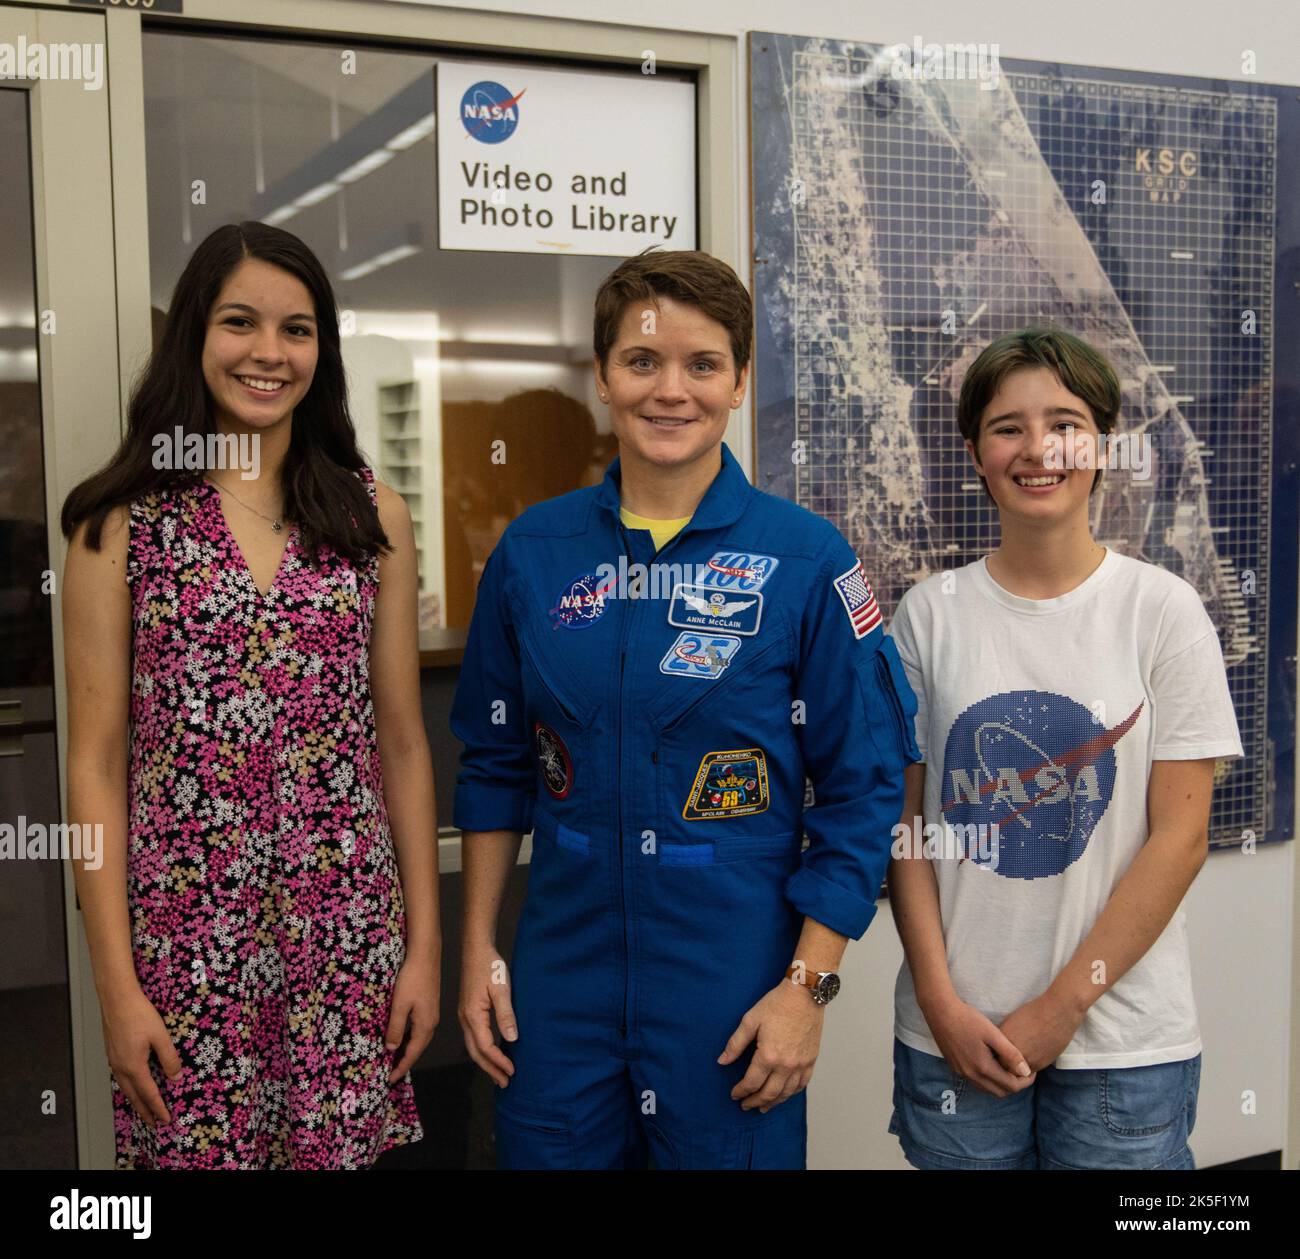 Student essay winners Amanda Gutierrez, left, and Taia Saurer pose with NASA astronaut Anne McClain at the agency’s news center at Kennedy Space Center in Florida on Sept. 2, 2022. Gutierrez and Saurer won the Artemis Moon Pod Essay Contest – a nationwide event involving nearly 14,000 students – for their creative visions of a pioneering journey to the Moon. The grand prize was a trip to Kennedy to watch the launch of Artemis I. Gutierrez, 17, is an 11th-grader from Lincoln, Nebraska, while Saurer, 14, is an eighth-grader from Laguna Beach, California. Stock Photo